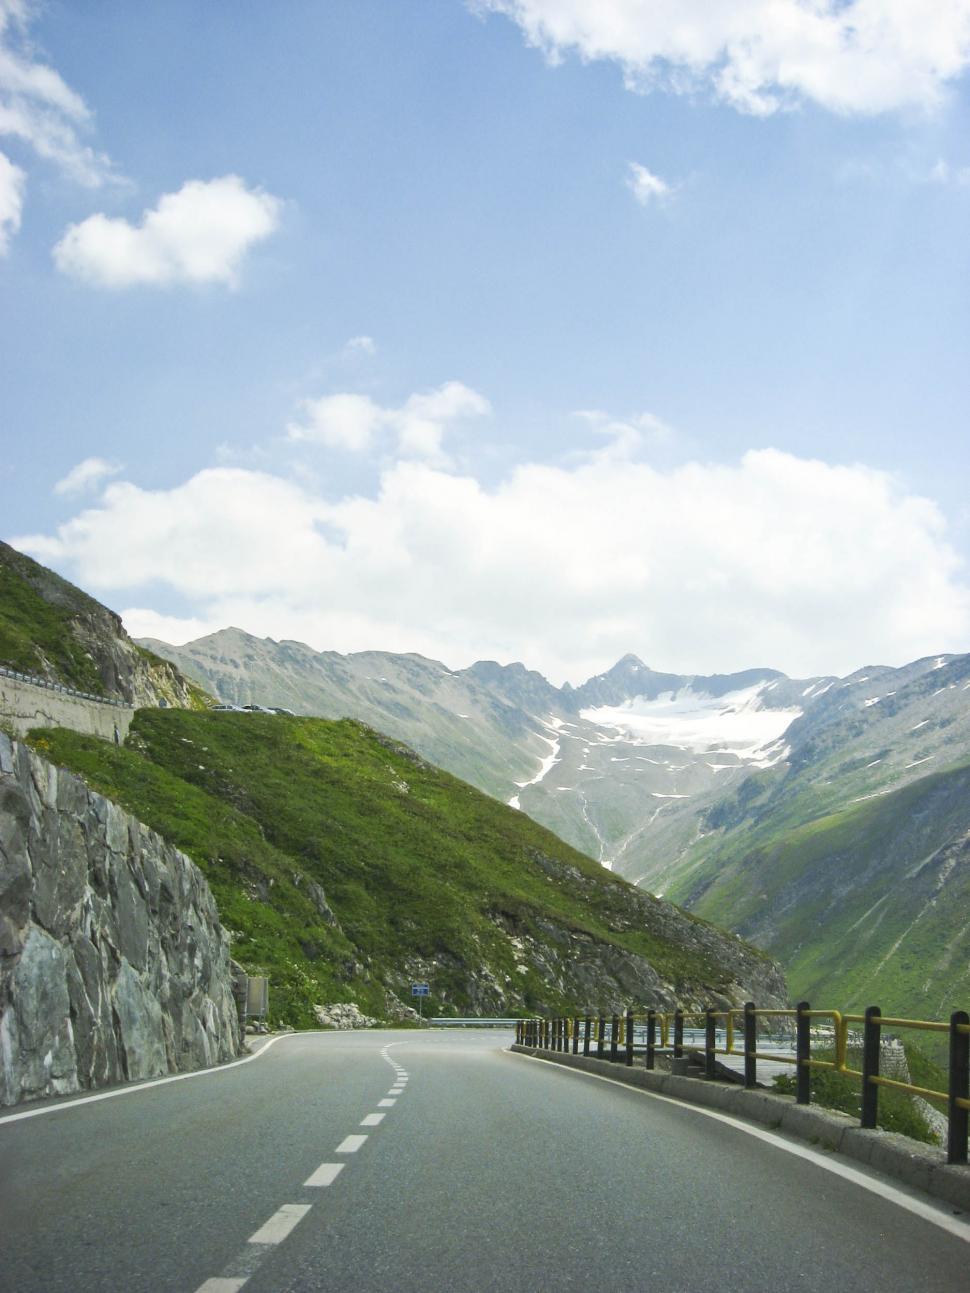 Free Image of Road in the Alps 